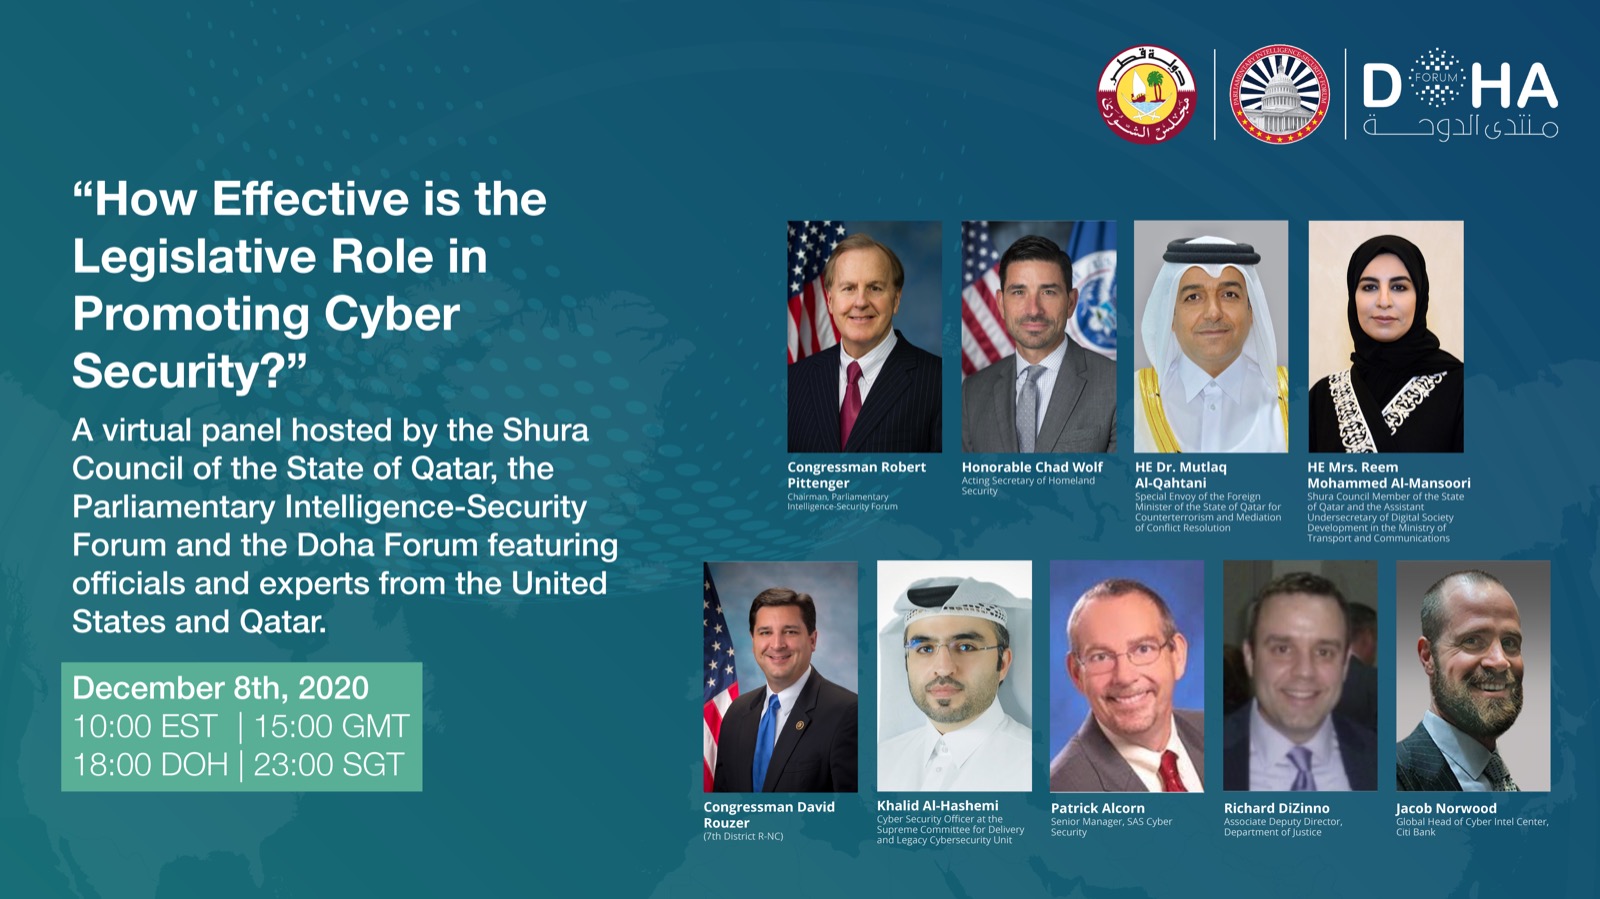 How effective is the Legislative Role in Promoting Cyber Security?